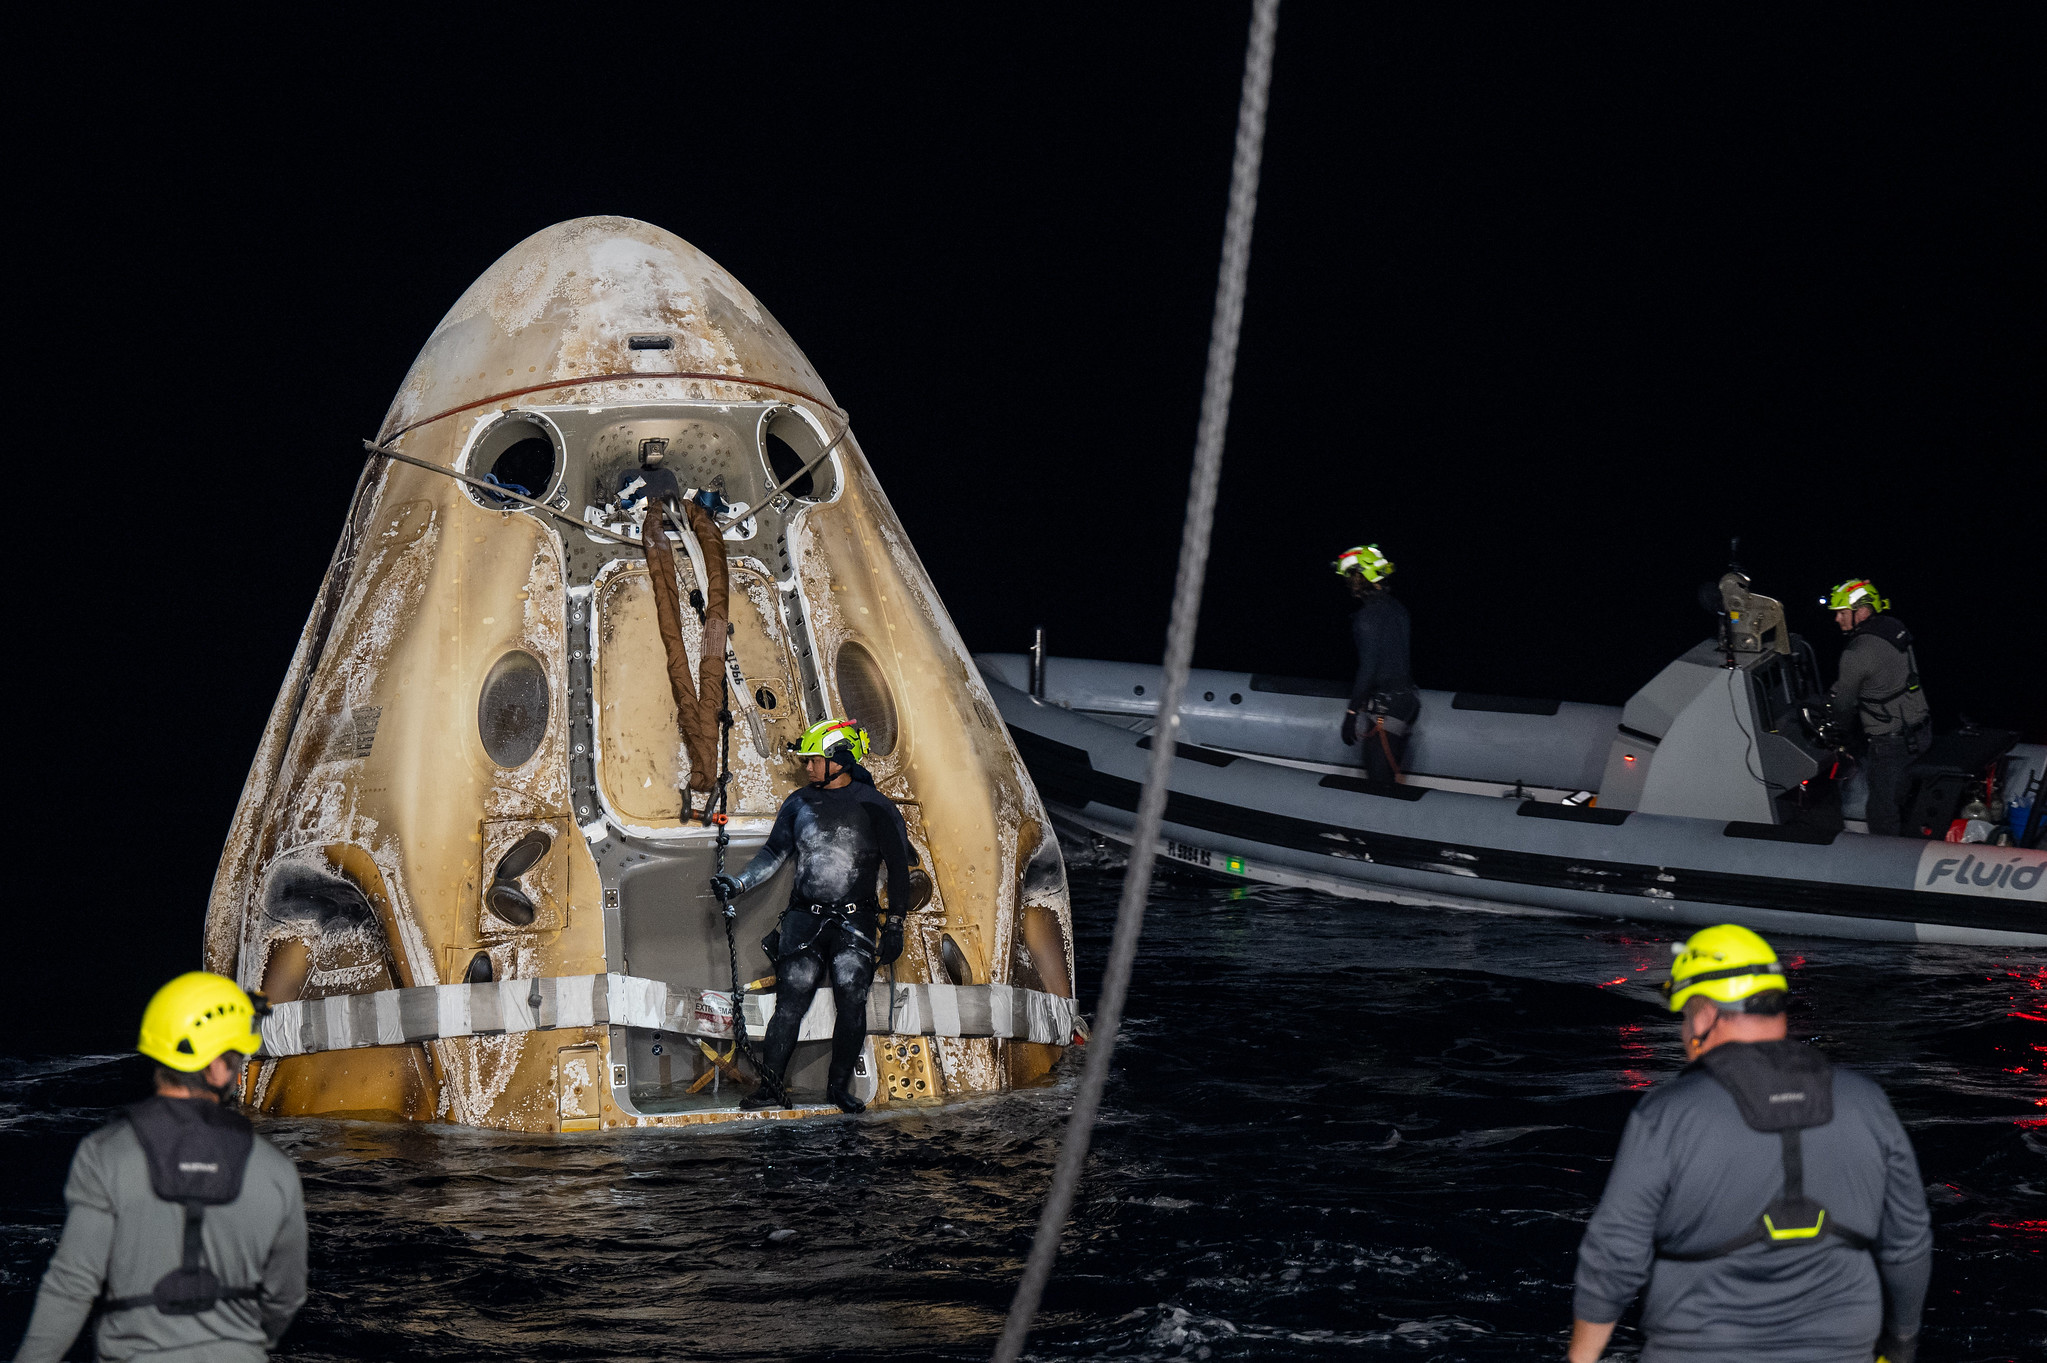 a spacecraft floats in the water as people in helmet look from boats